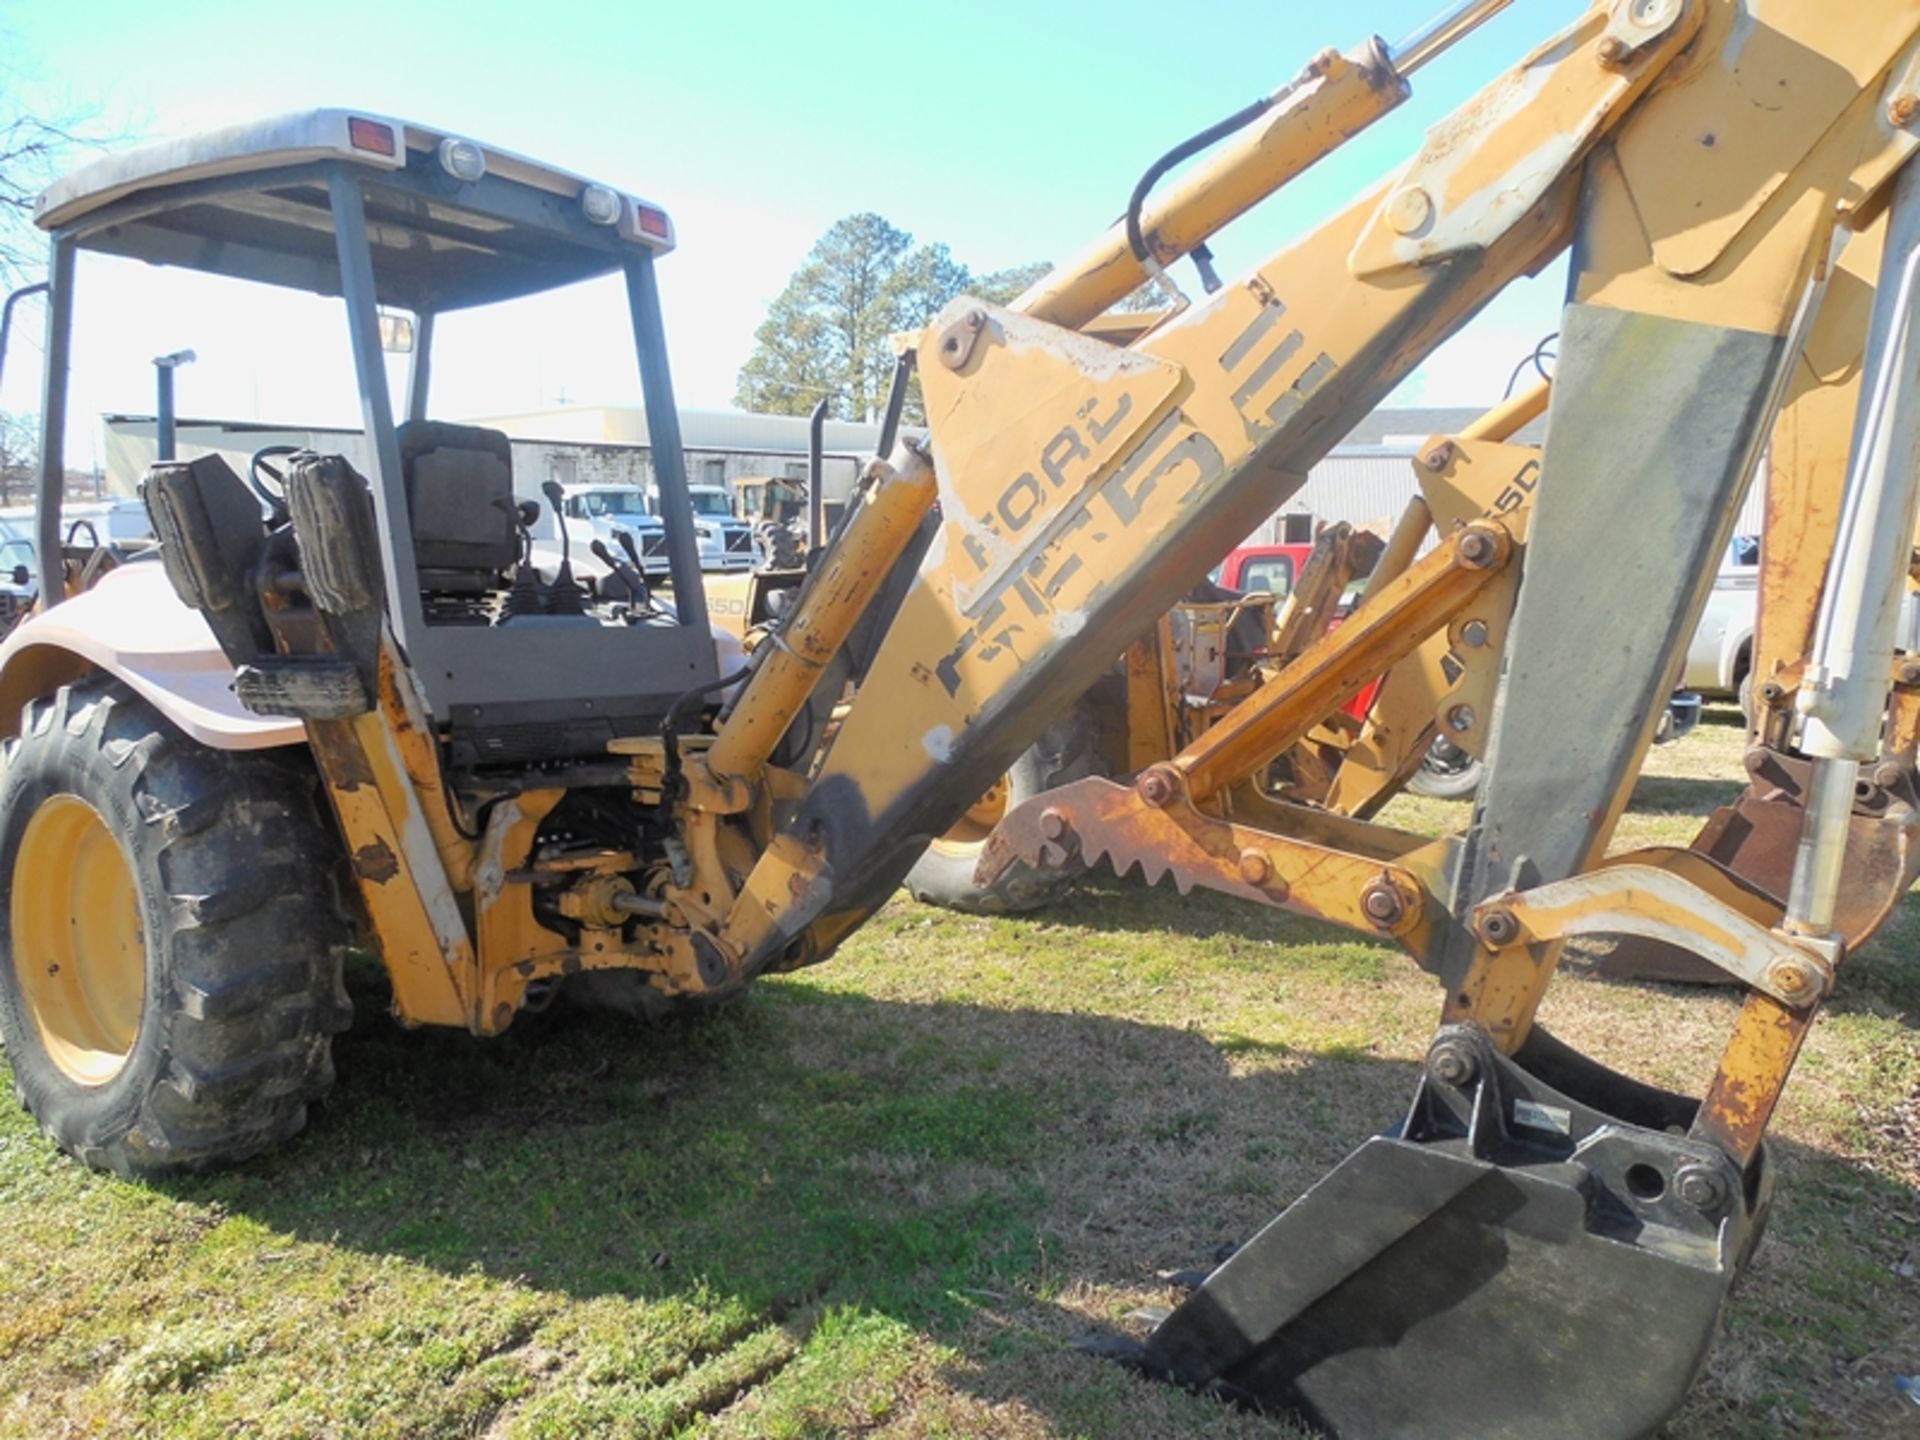 NEW HOLLAND 555E backhoe/loader, 2WD, thumb, ONLY 772 hrs., comes with complete manuals, paint & - Image 4 of 4